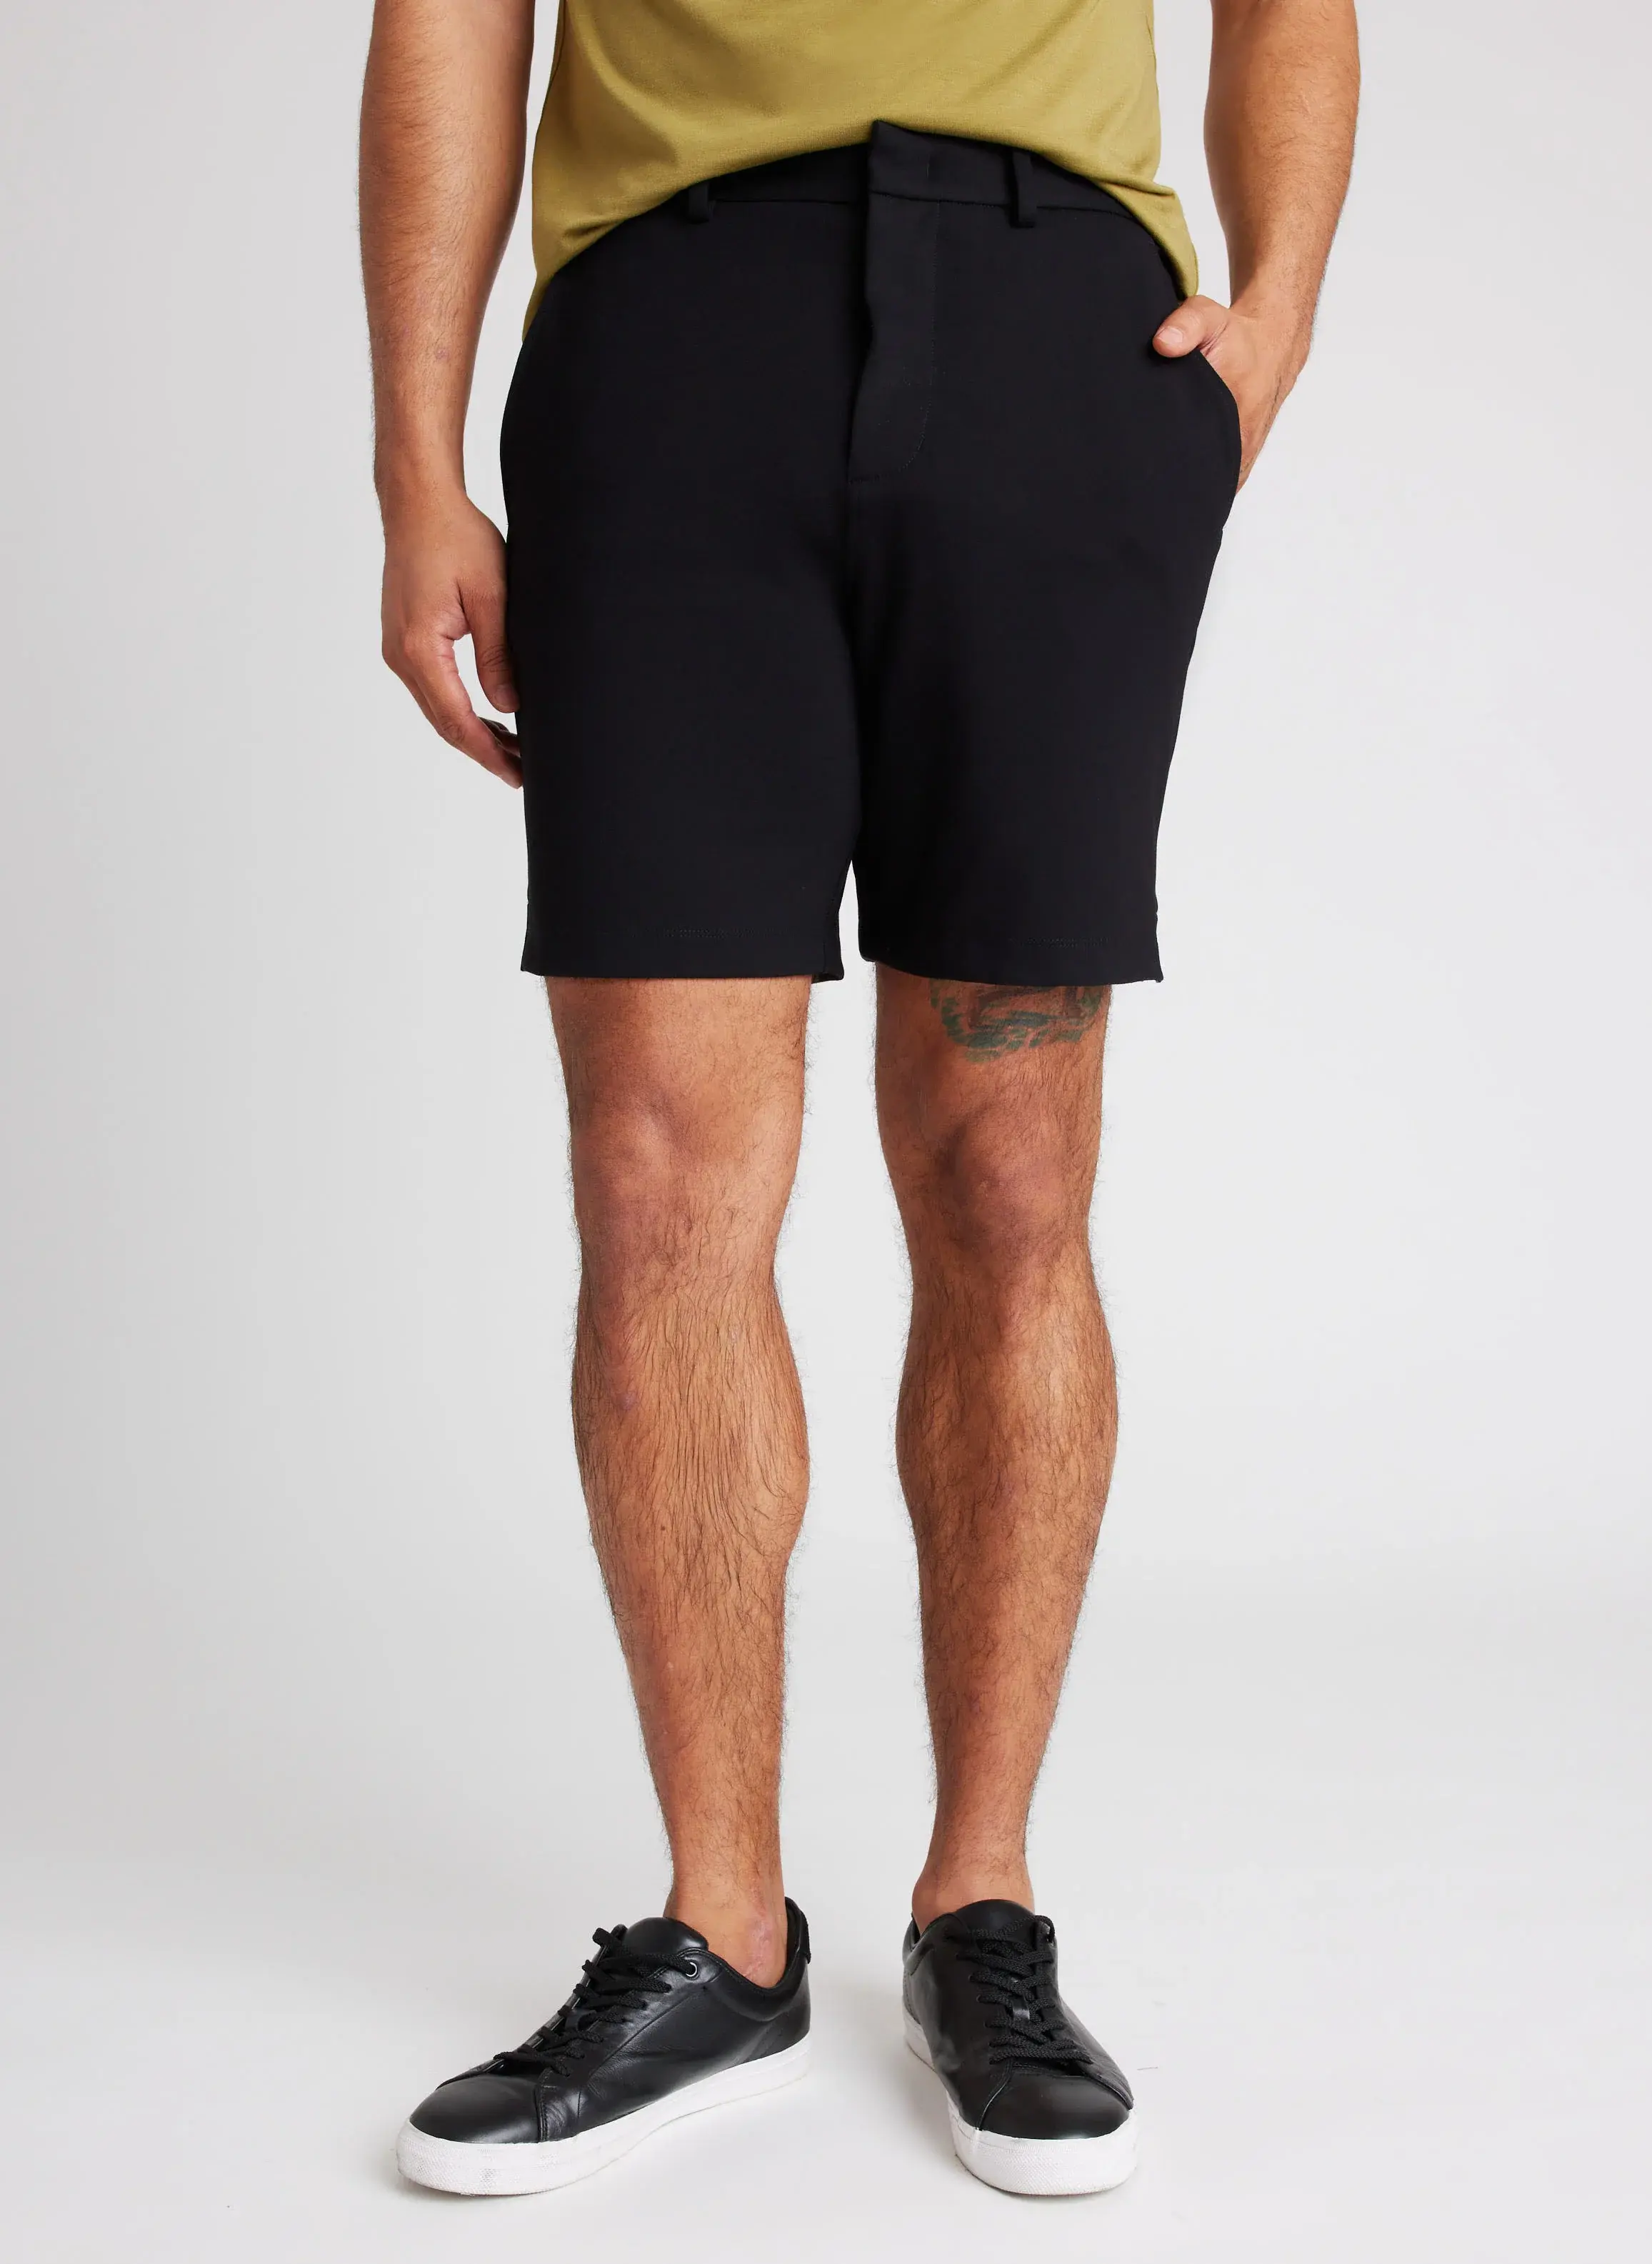 Kit And Ace Comfort Shorts. 1